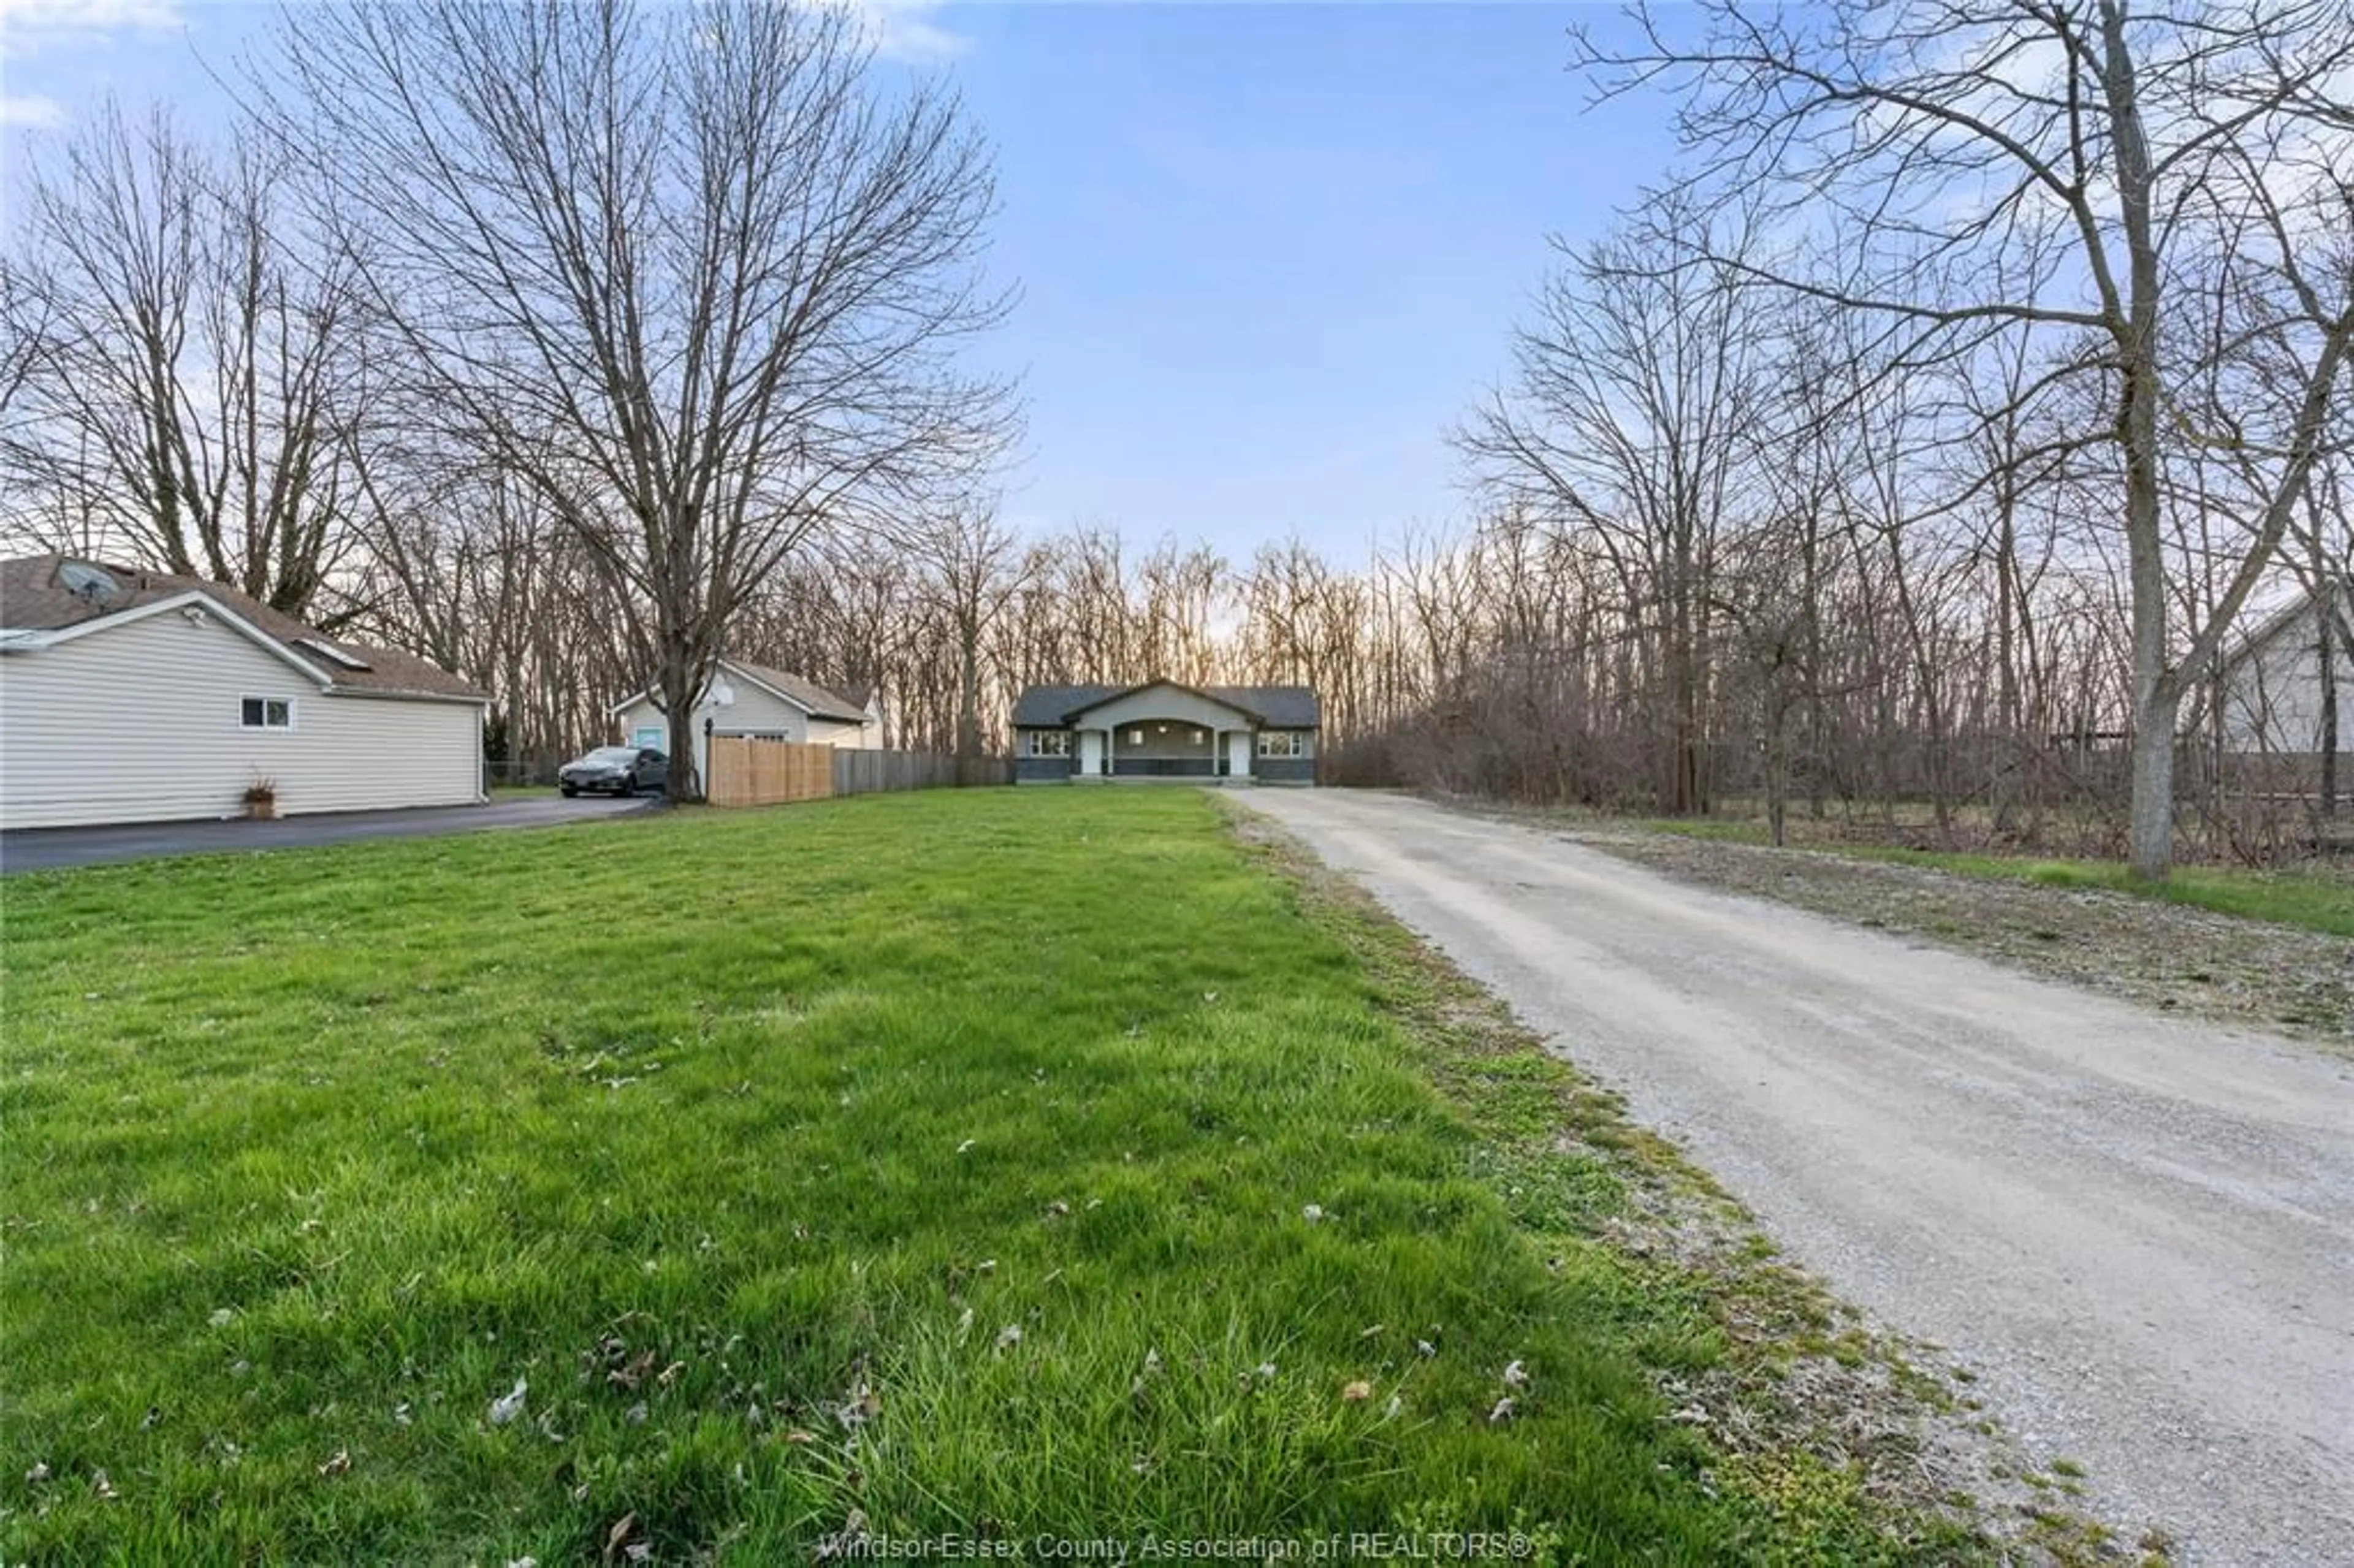 Street view for 3762 3RD CONCESSION, Amherstburg Ontario N9V 2Y8